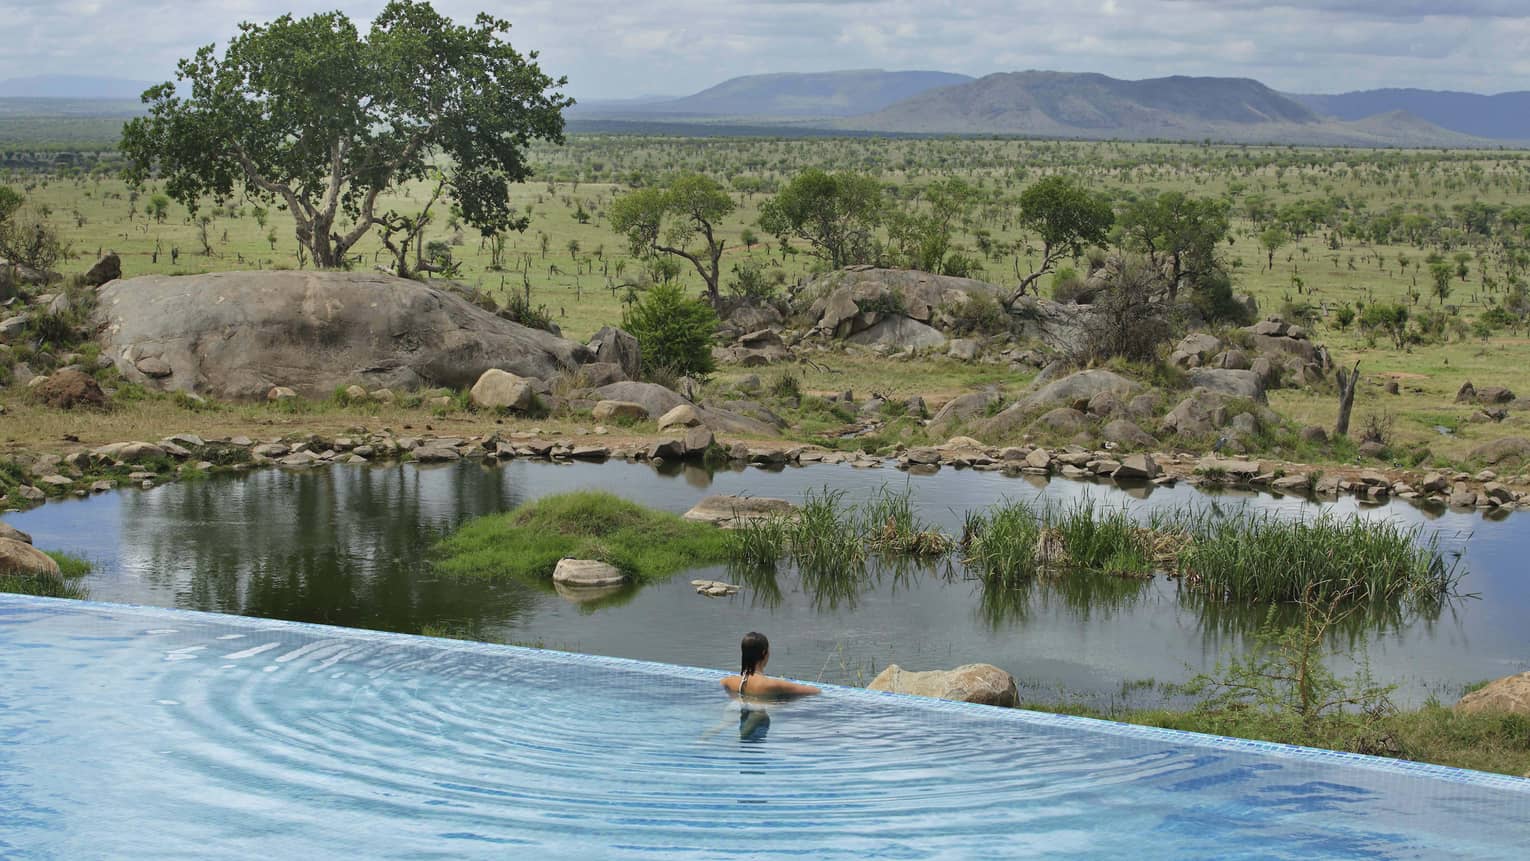 Woman stands at edge of infinity pool overlooking animal watering hole